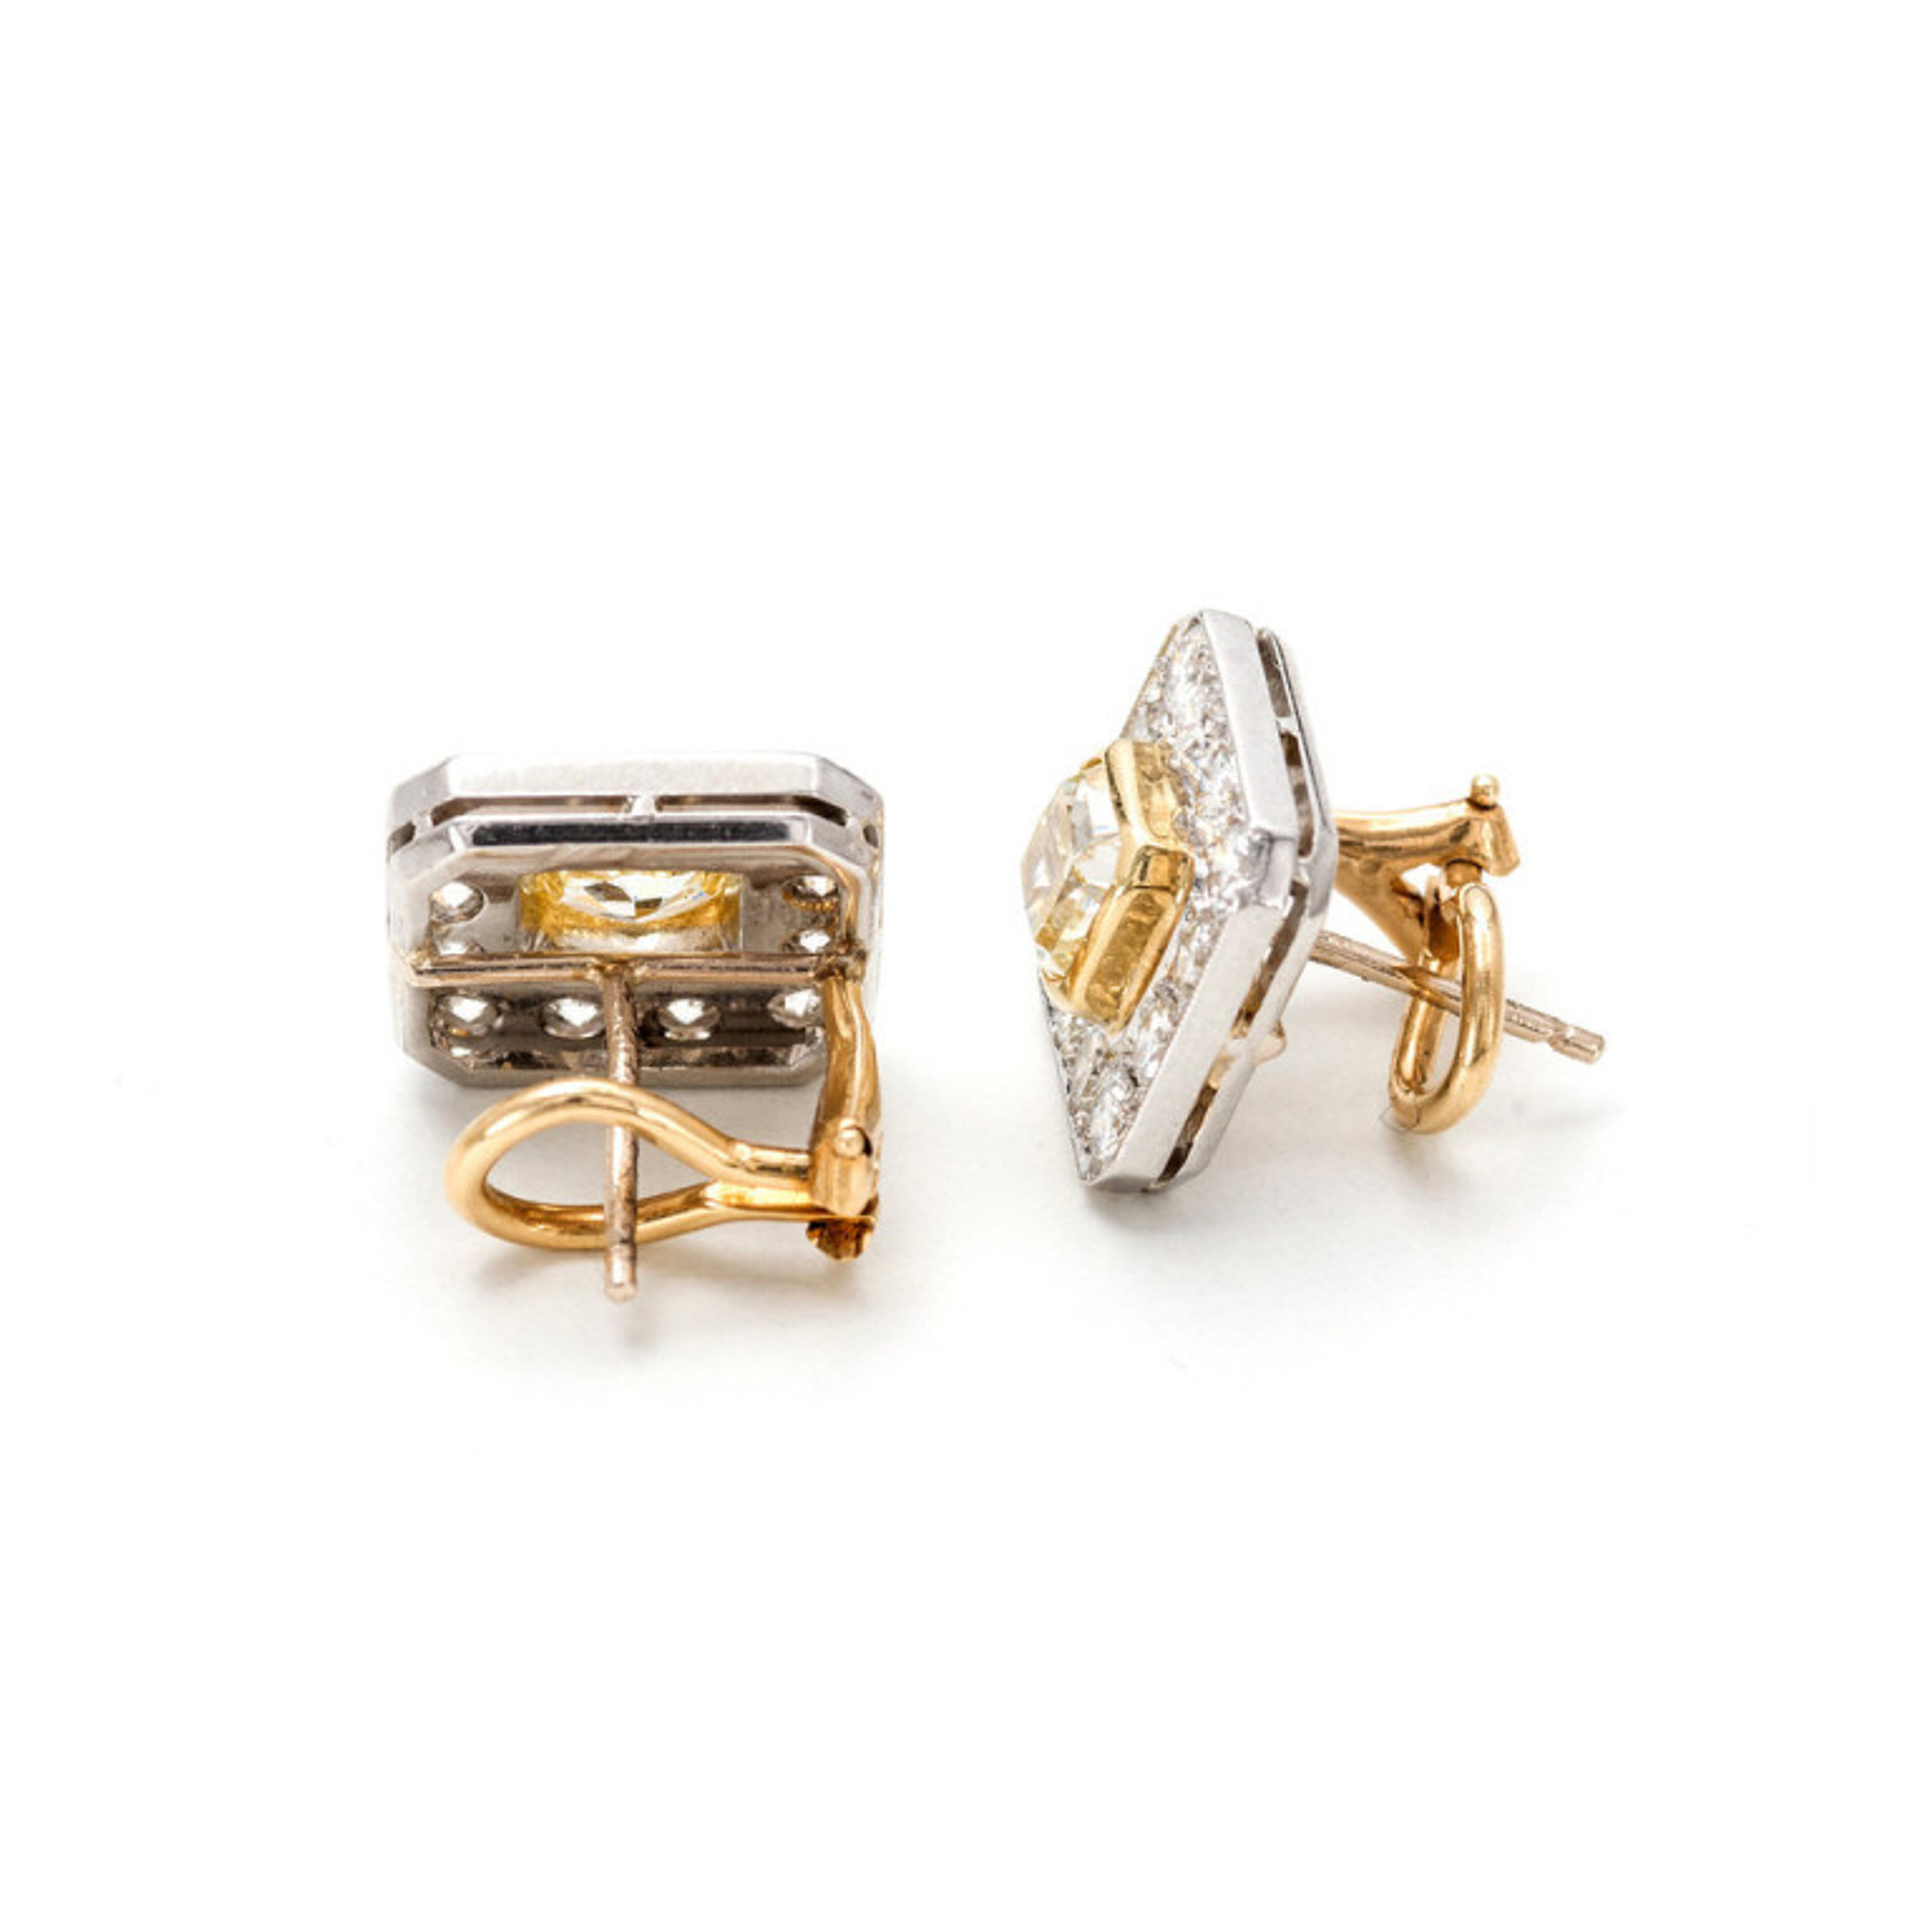 Yellow And Colorless White Diamond Earrings - petersuchyjewelers